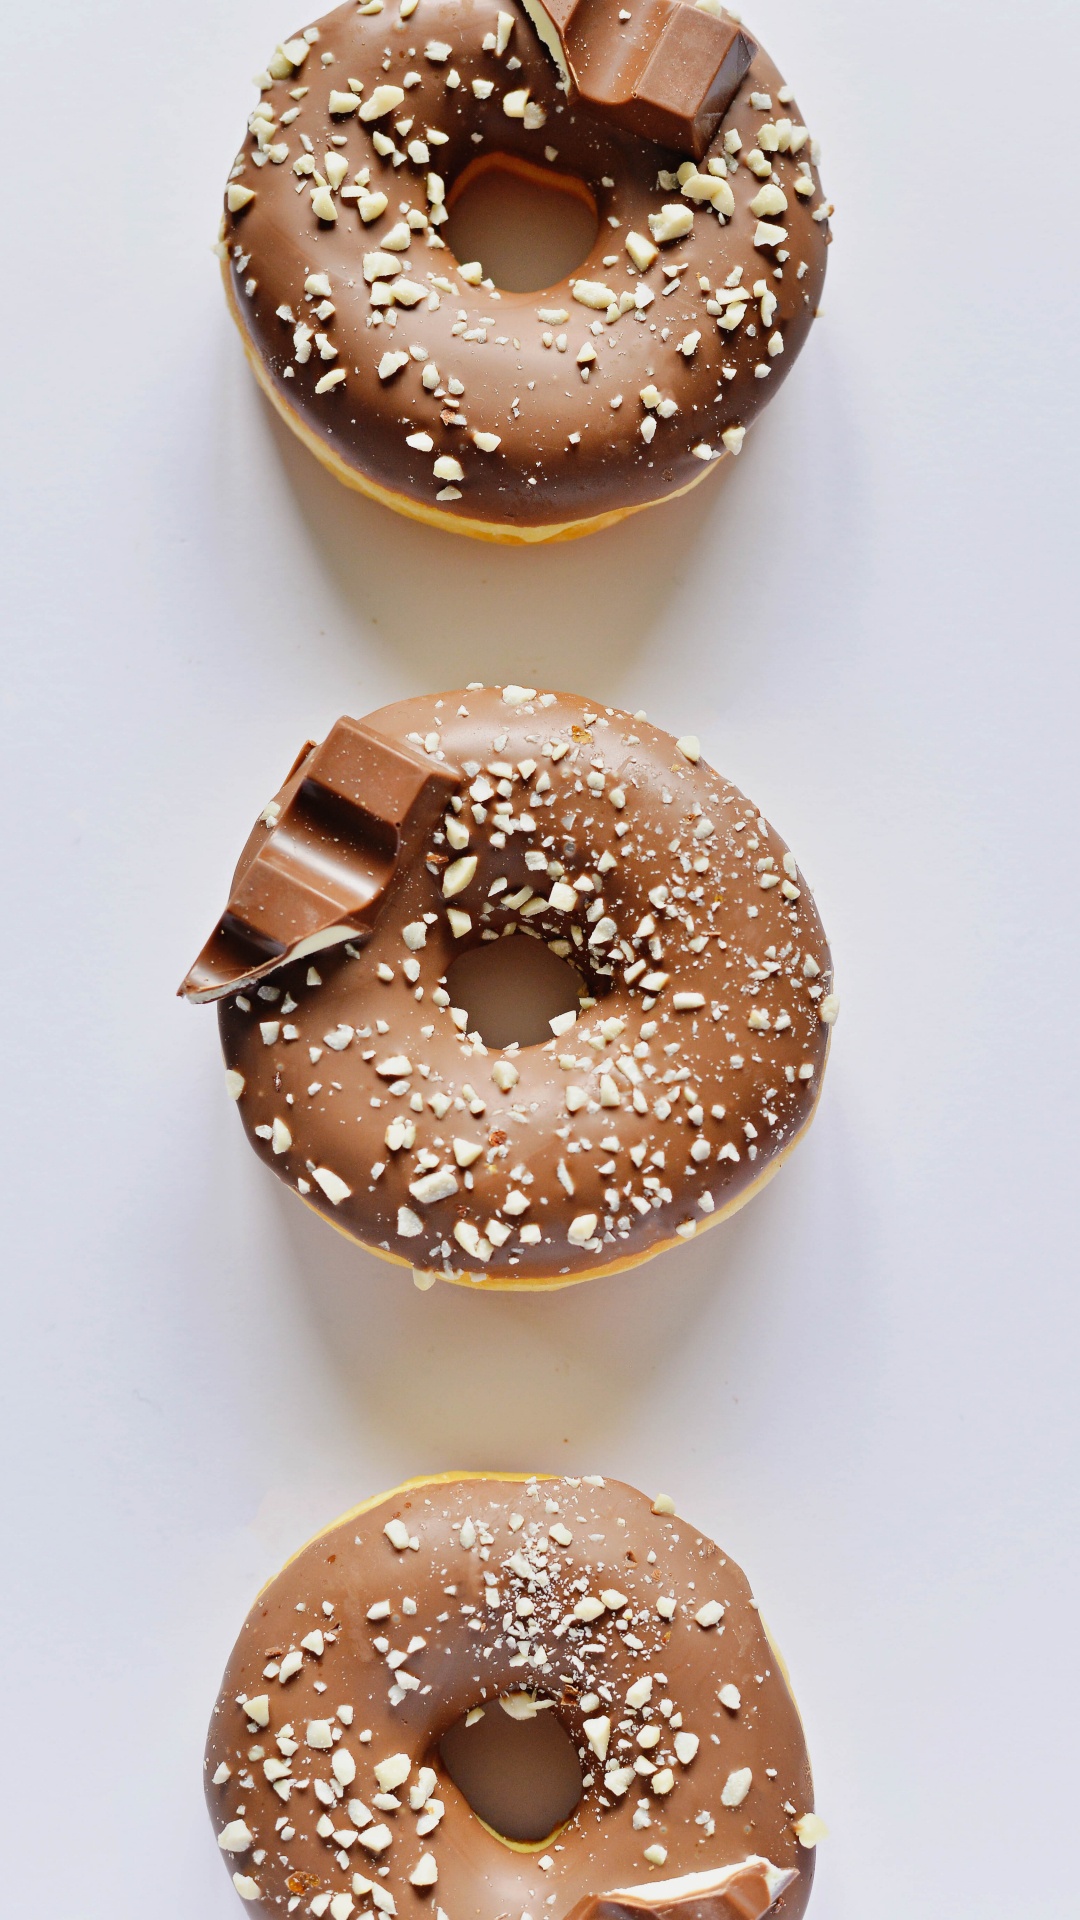 Brown Donut on White Table. Wallpaper in 1080x1920 Resolution